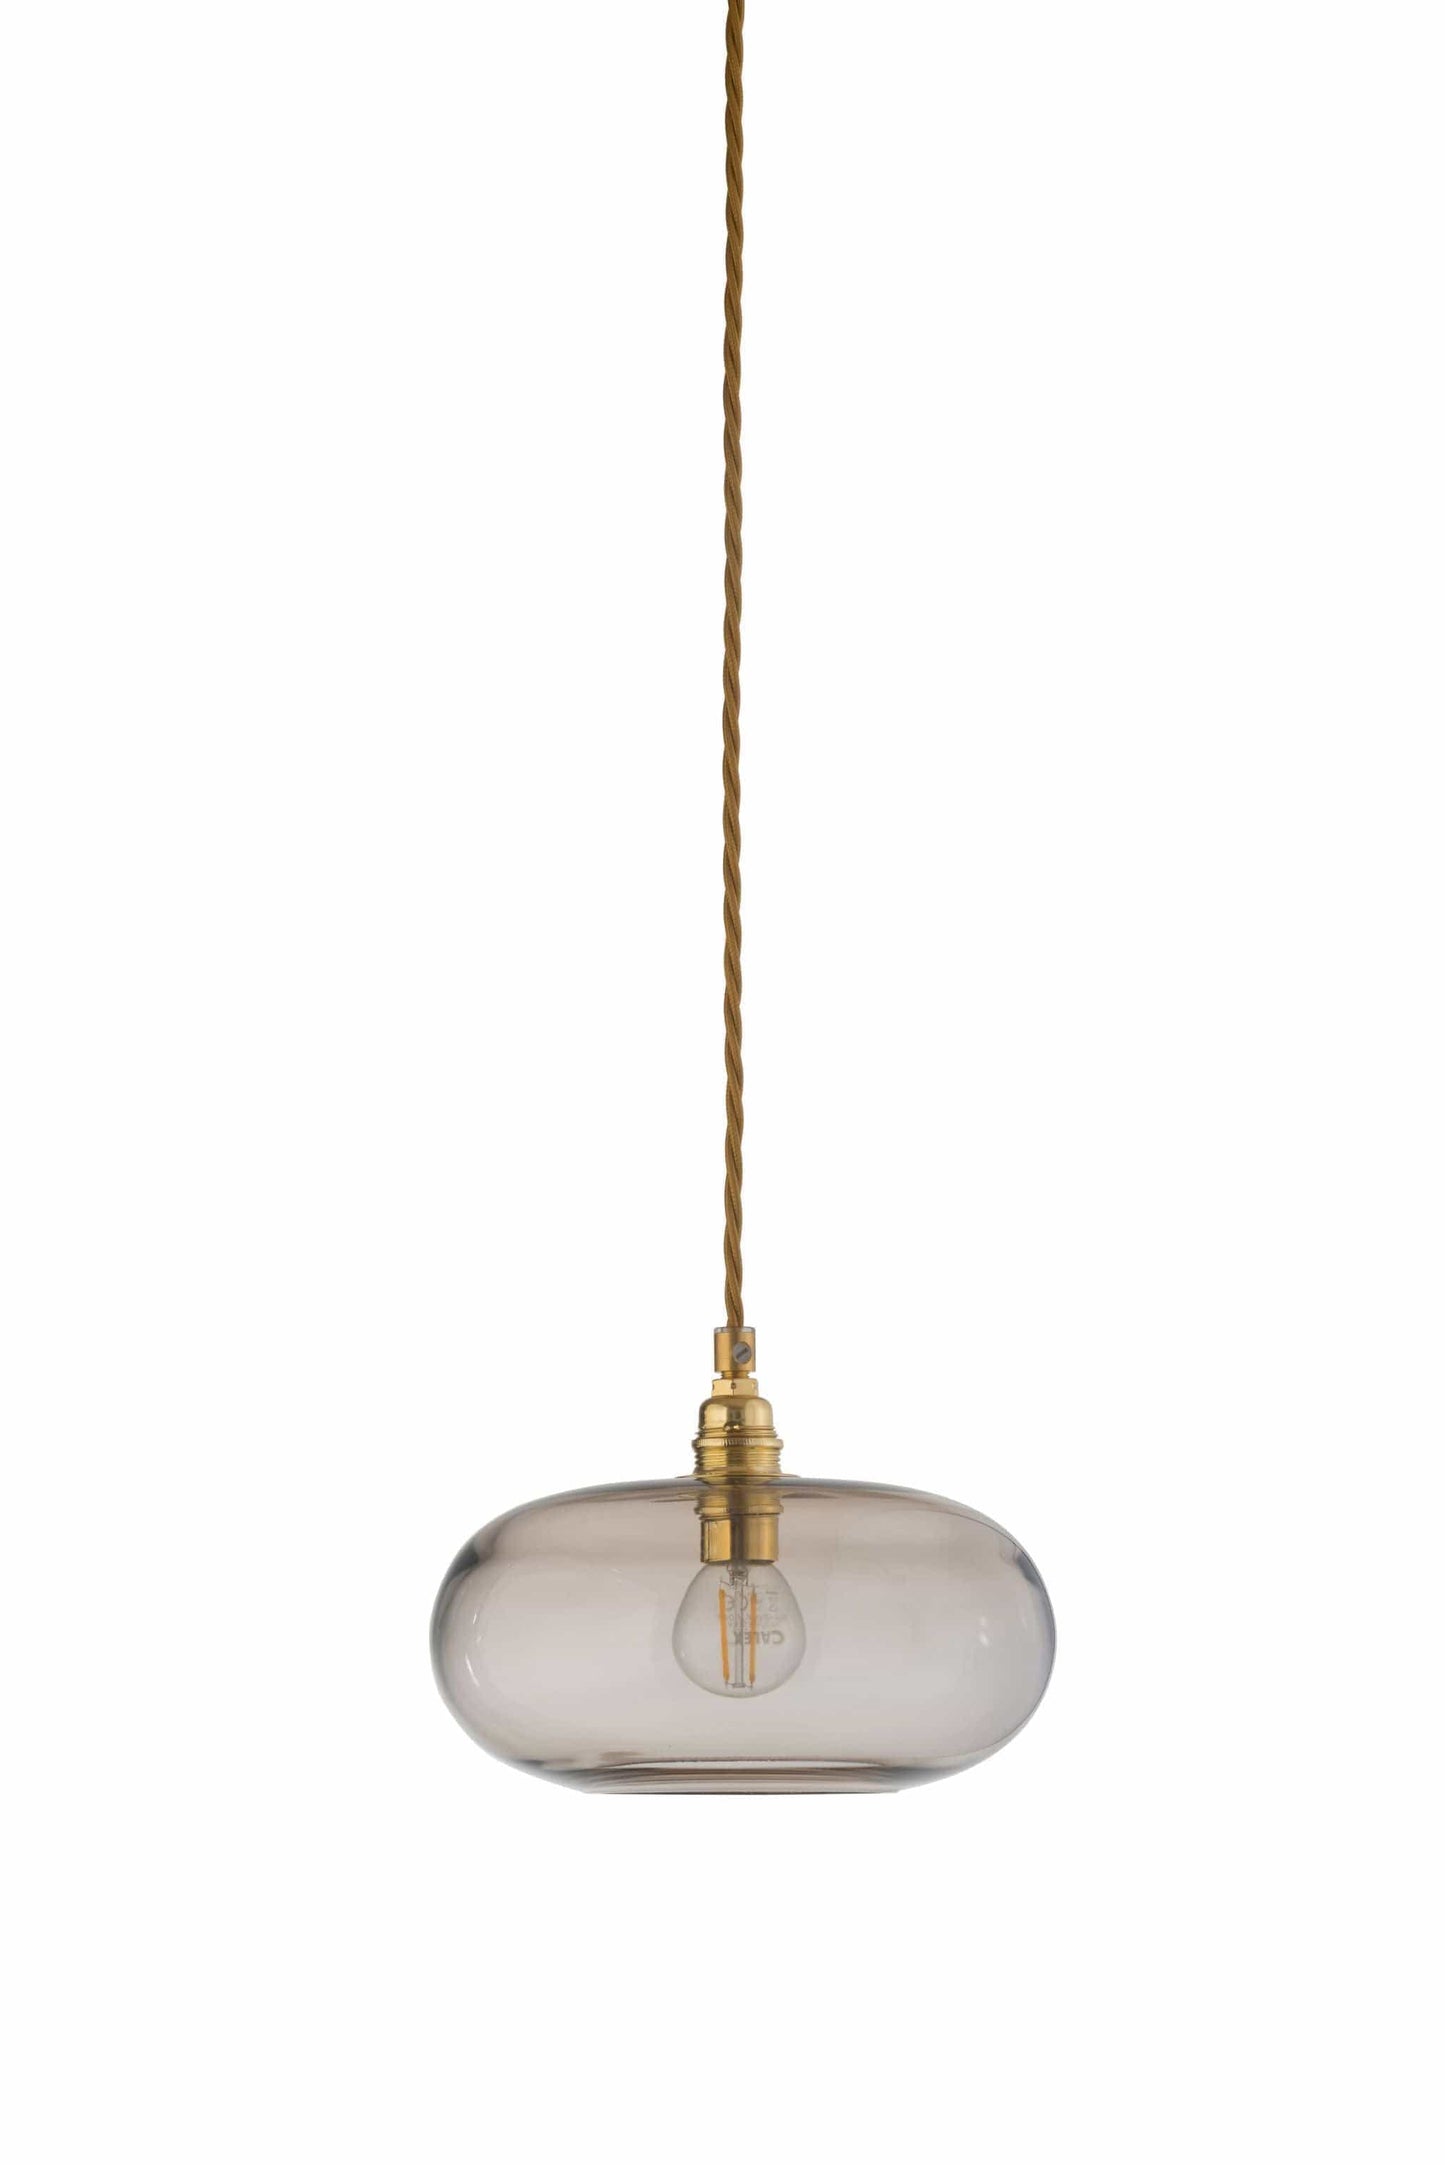 Ebb&Flow Pendant lights Chestnut brown with gold fittings Horizon Mouth-Blown Glass Pendant Light, small